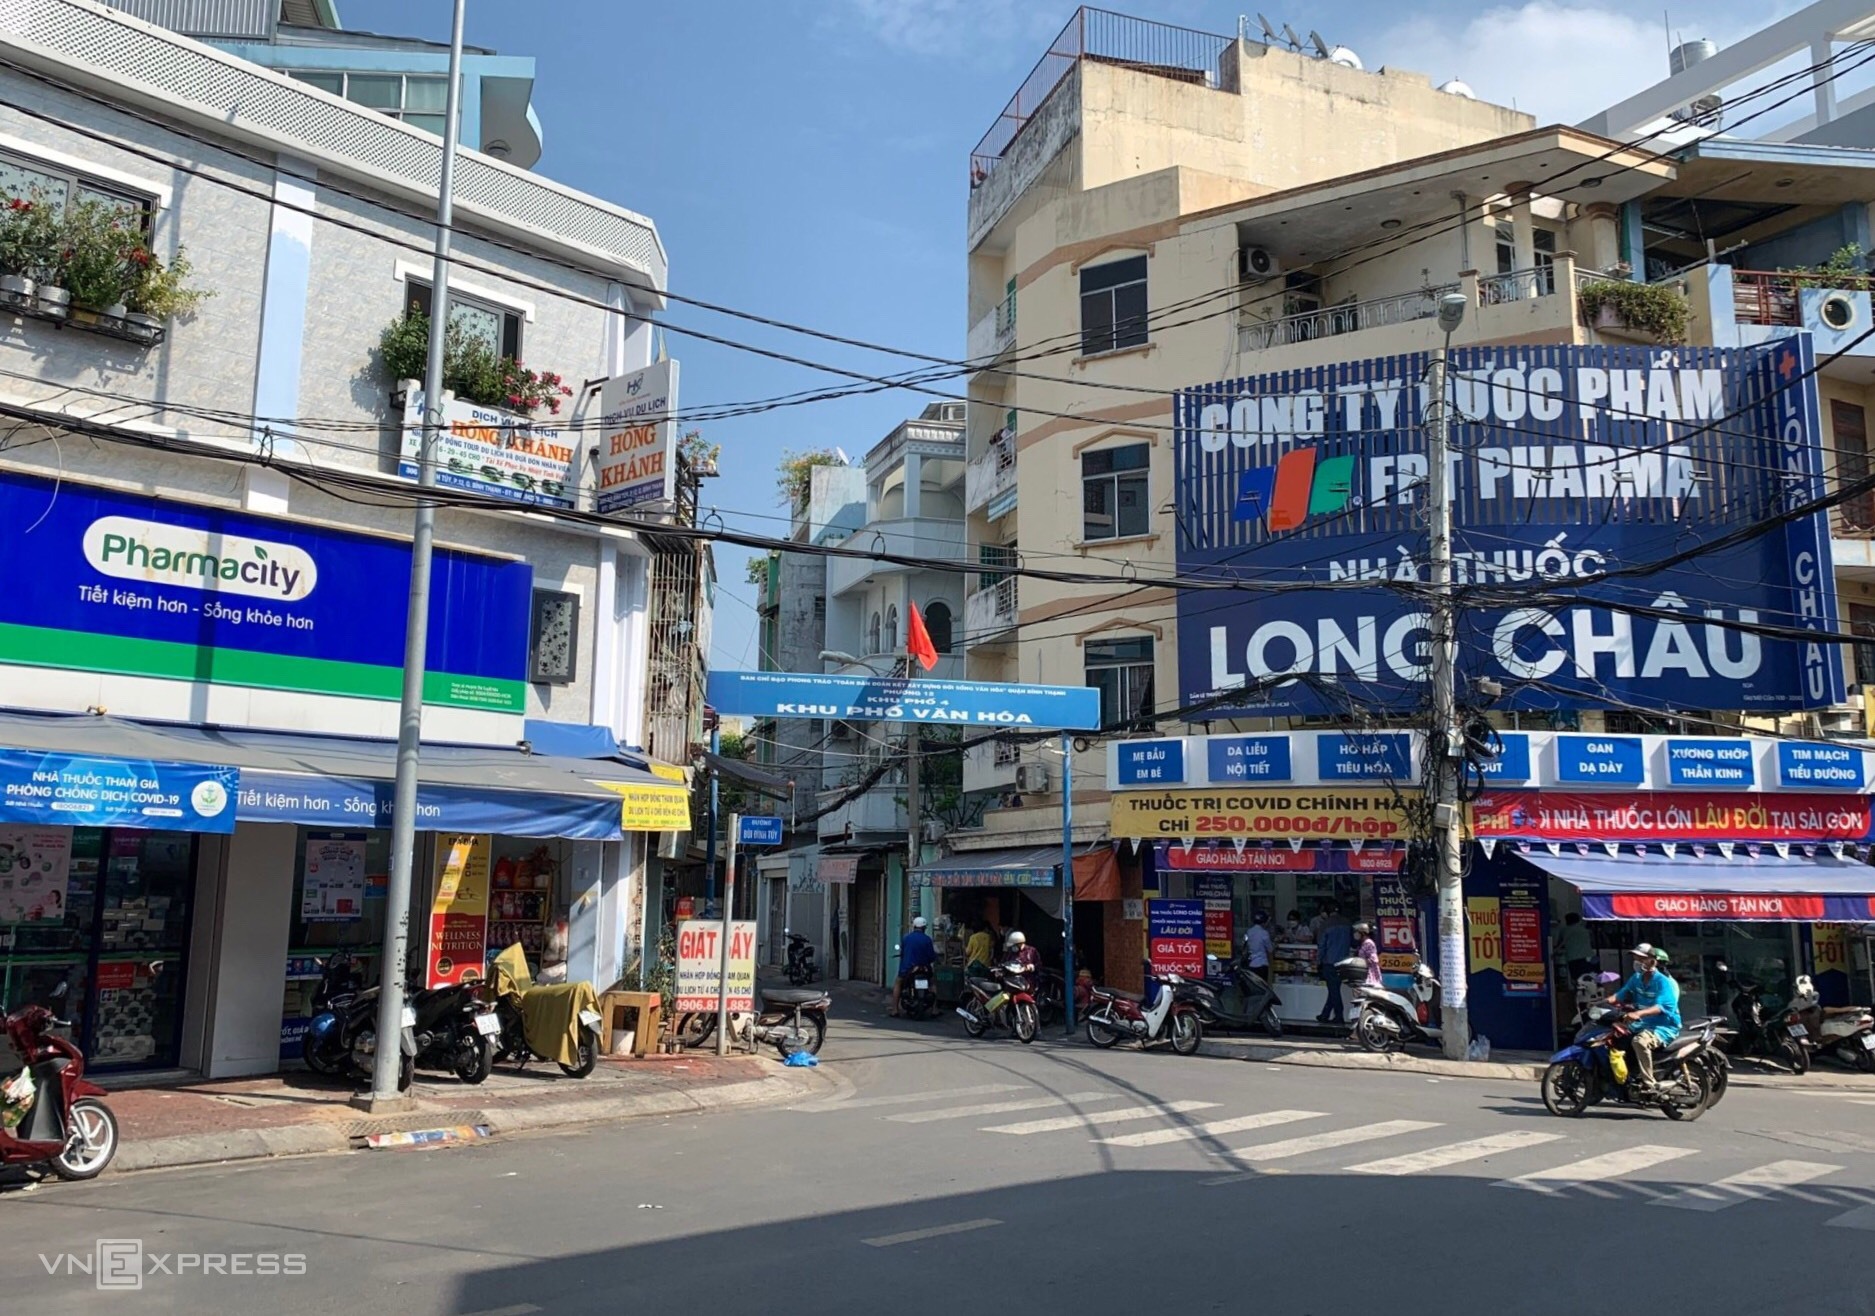 Drugstores of Pharmacity (left) and FPT Retails Long Chau located next to each others in HCMCs Binh Thanh District. Photo by VnExpress/Quynh Tran